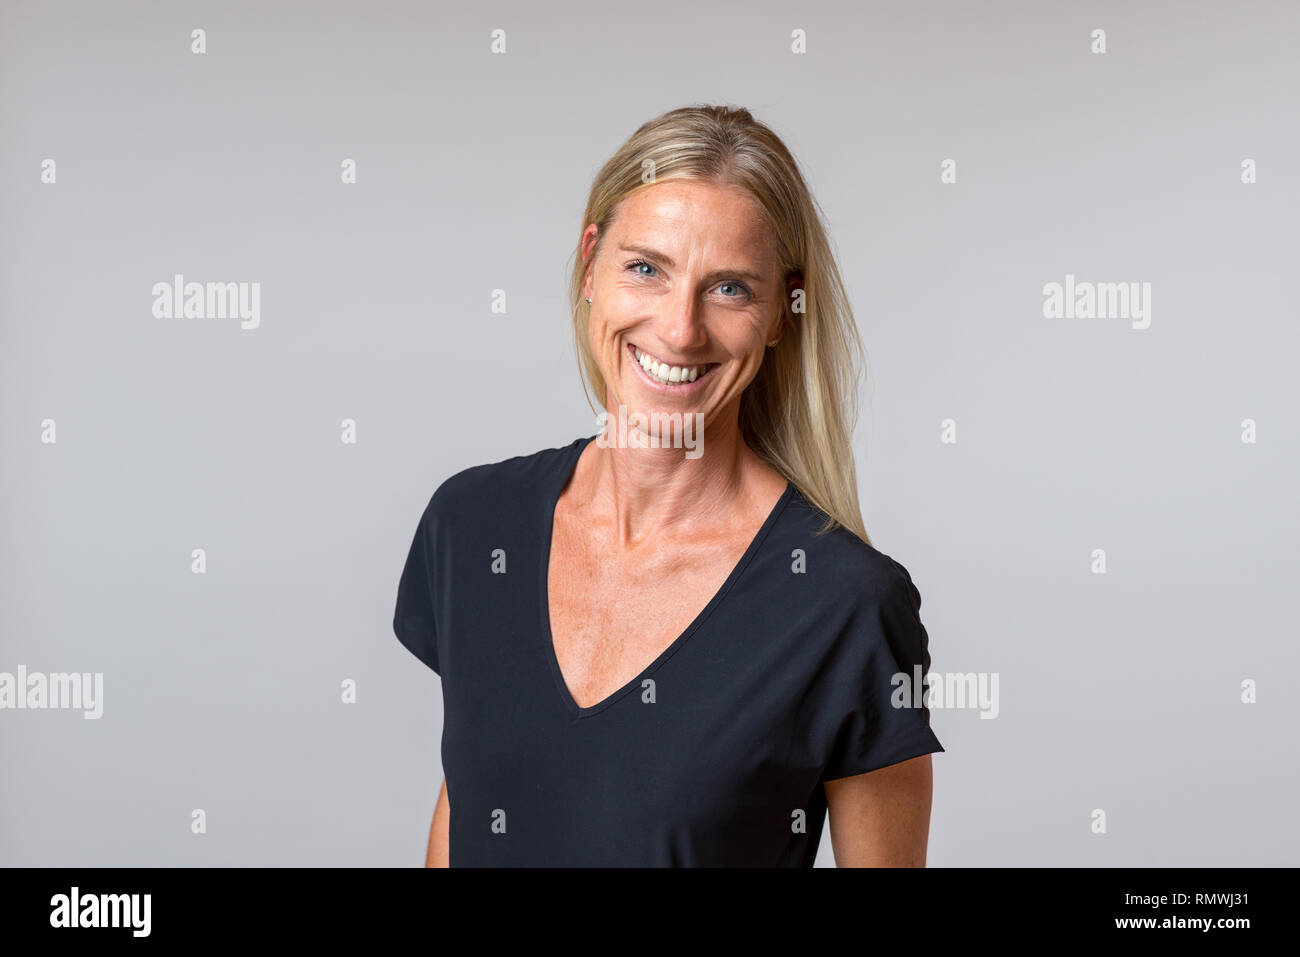 Attractive happy blond woman with a enthusiastic smile staring at the camera in a close up portrait isolated on grey Stock Photo